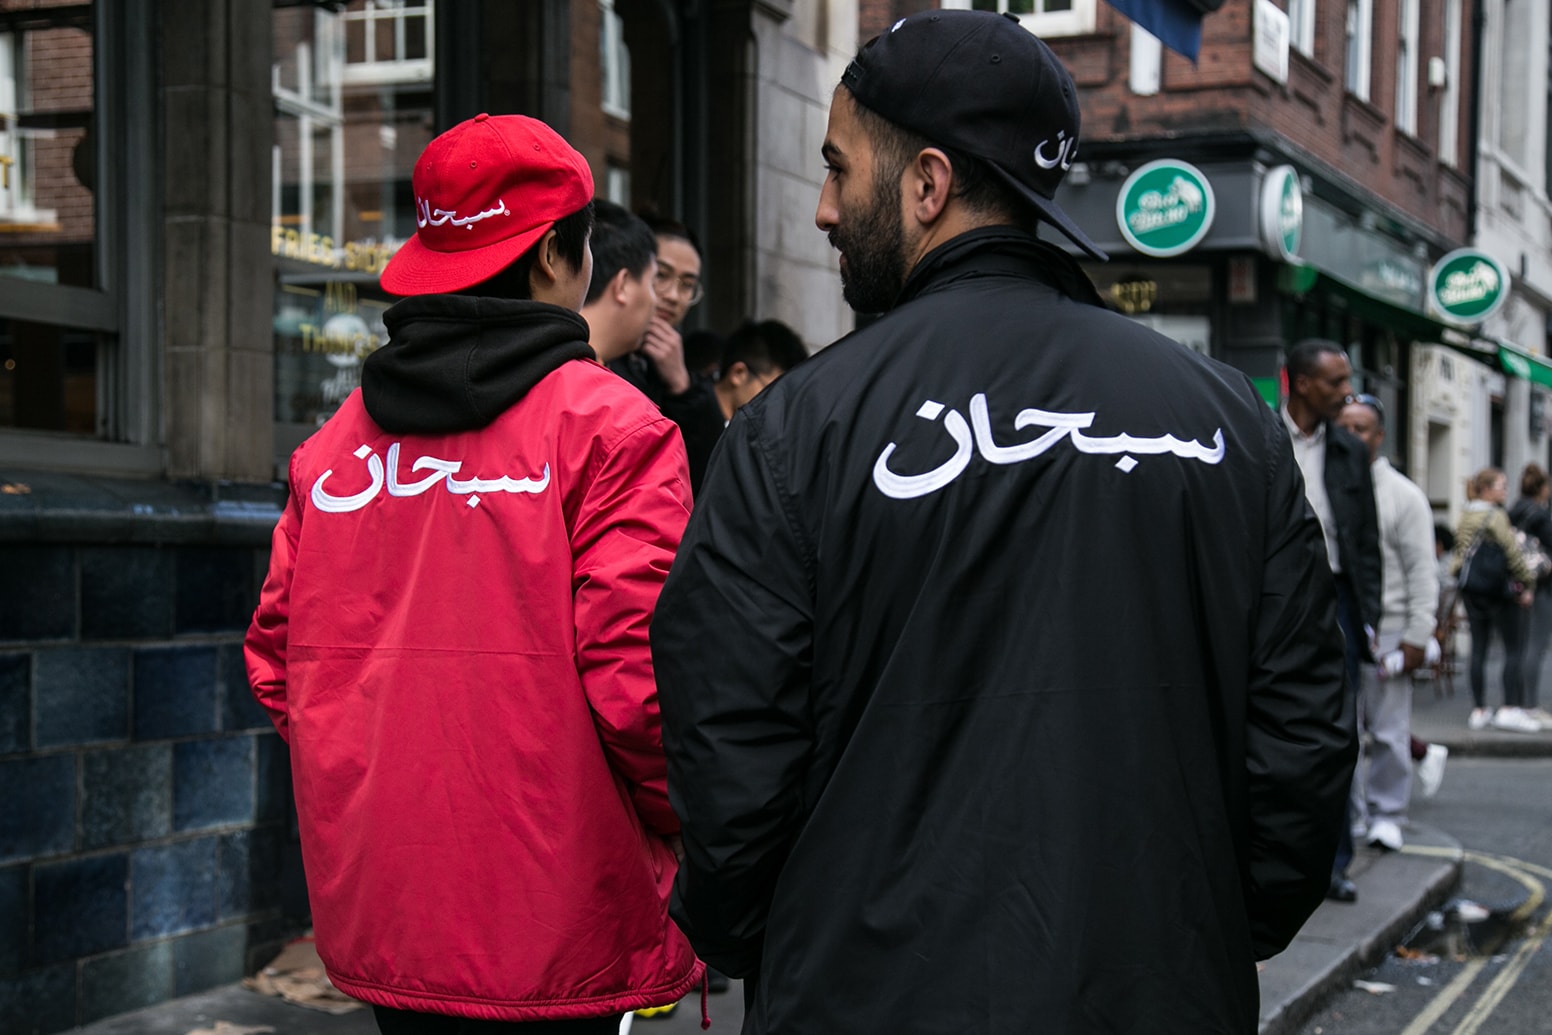 Supreme 2017 Fall/Winter September 28 Week 6 Six London Drop Photos Highlights Street Style Clippers